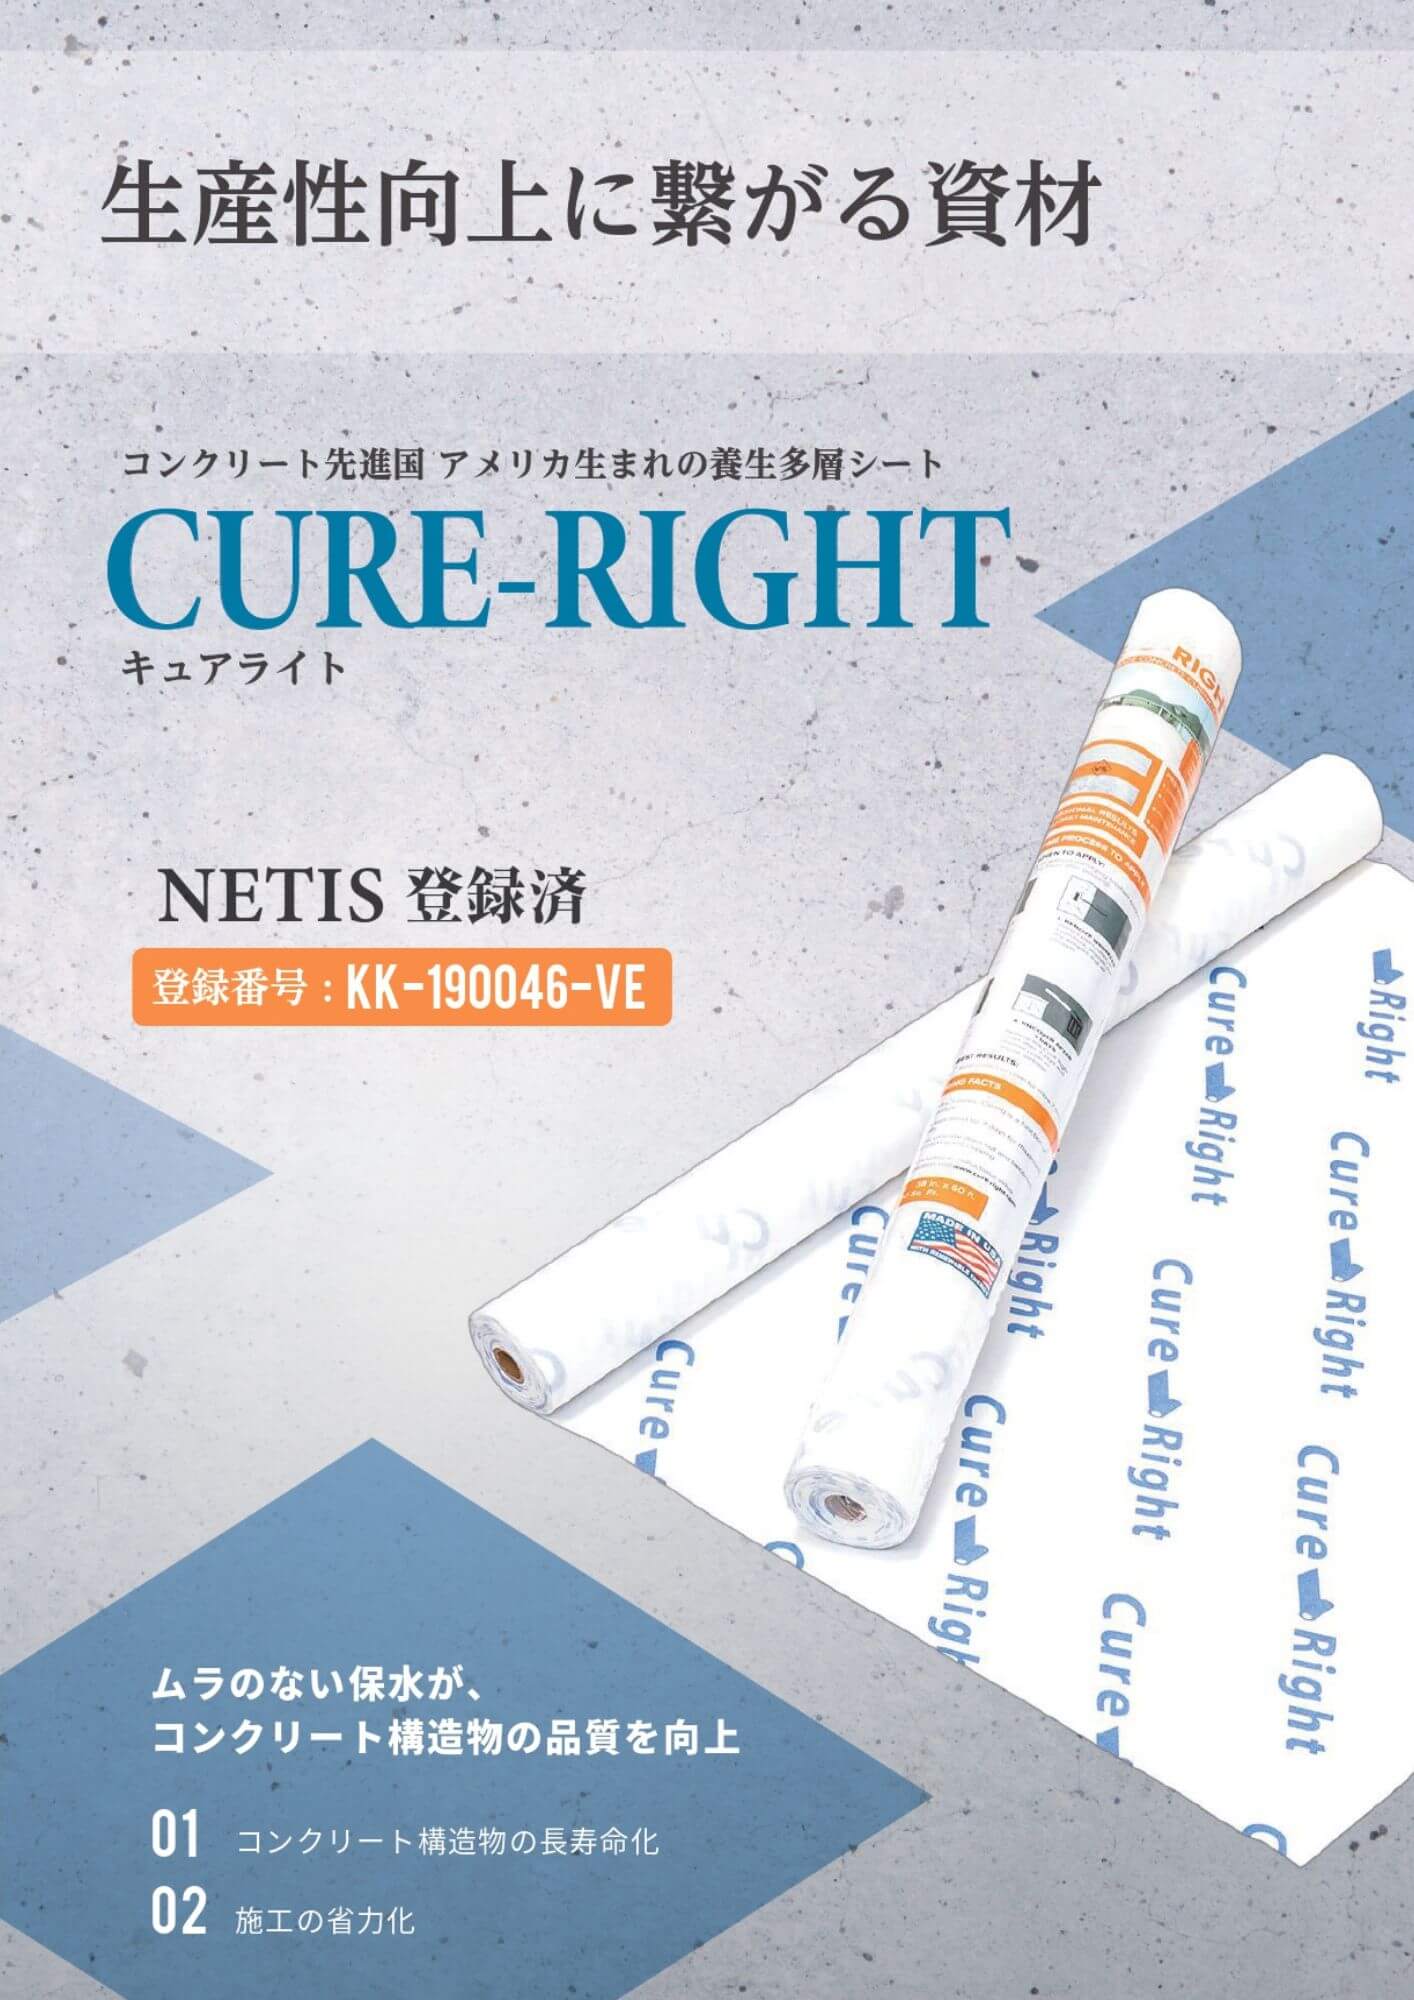 CURE-RIGHT